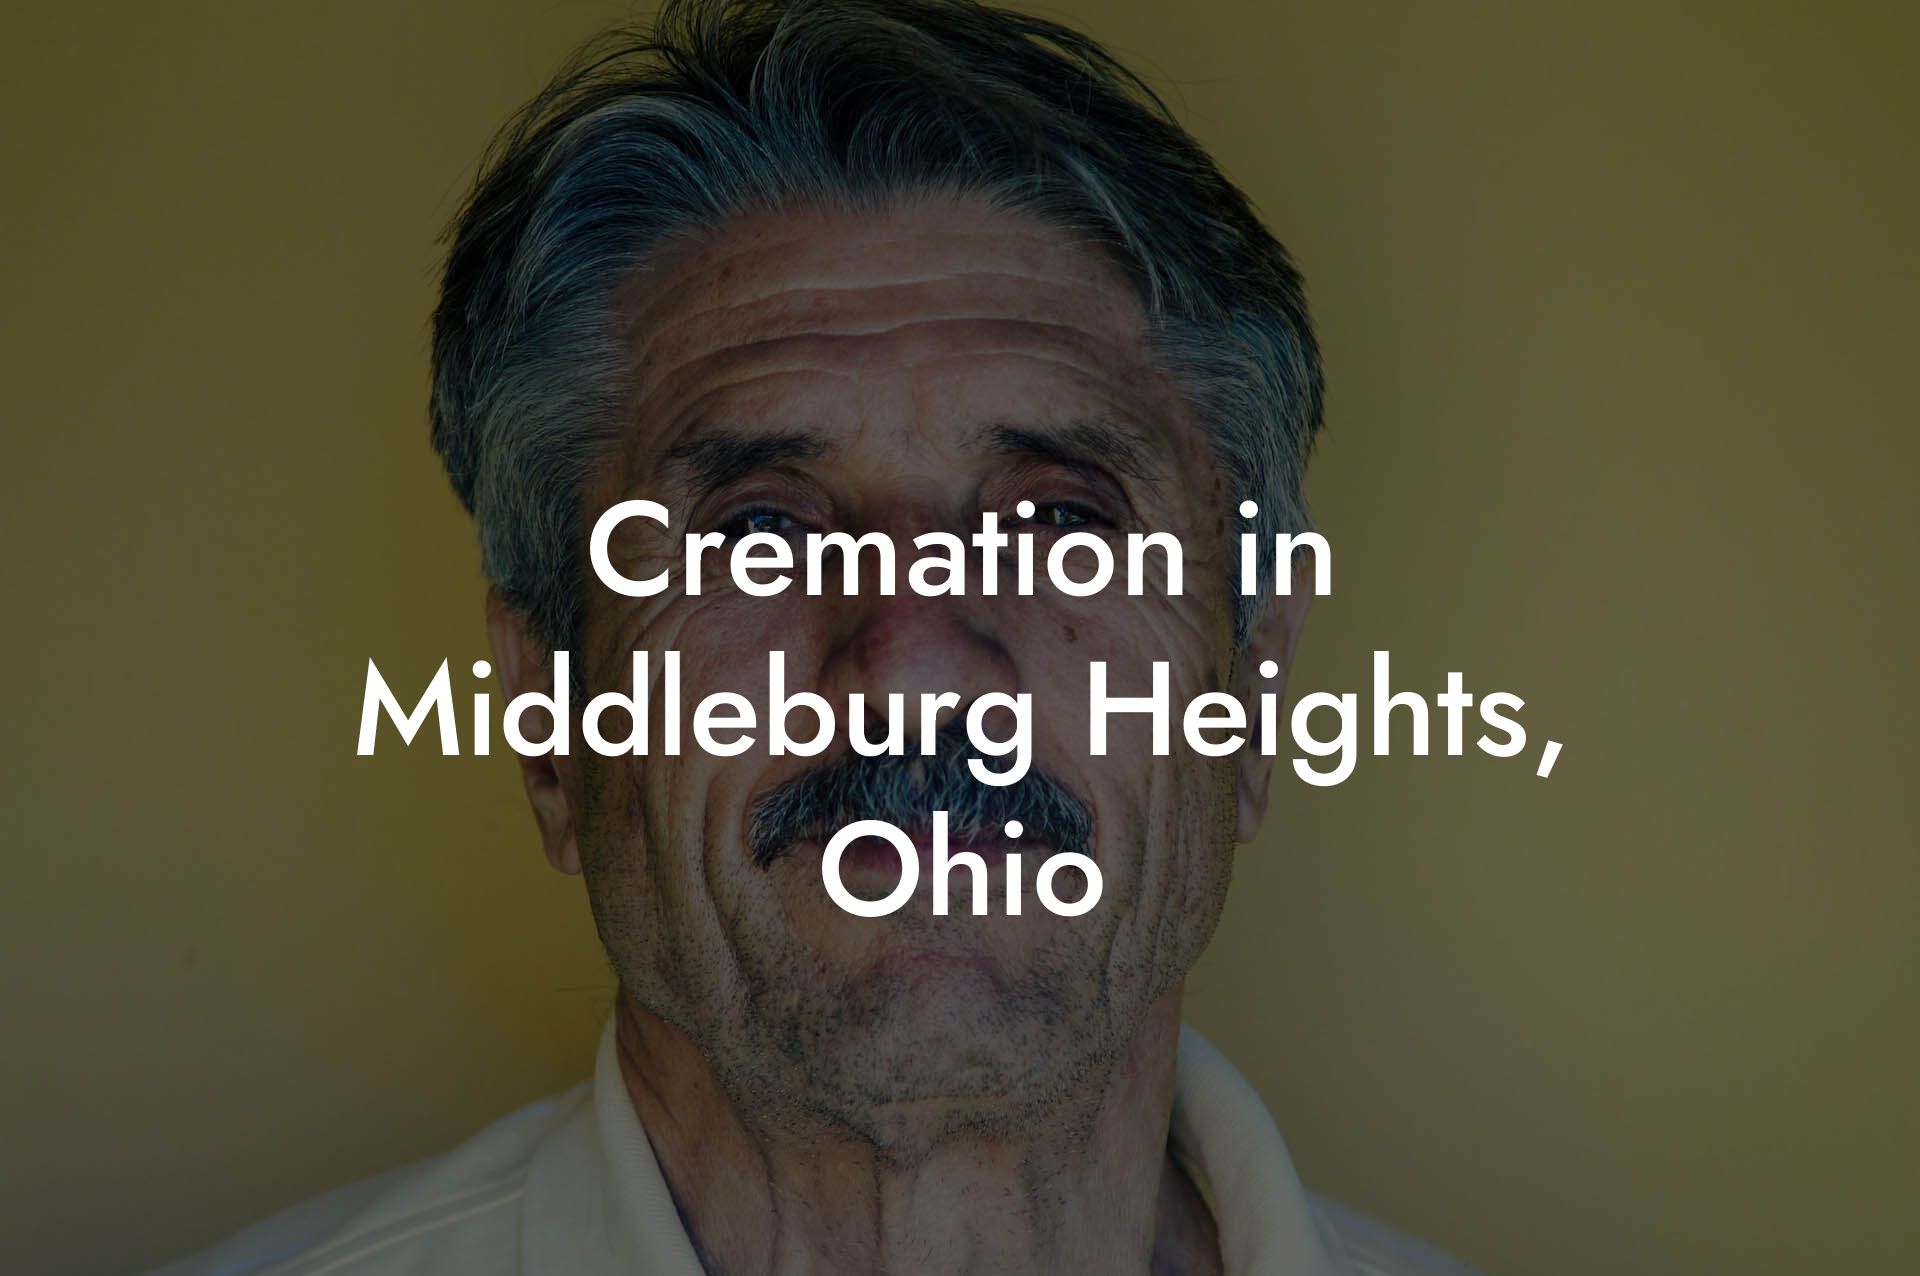 Cremation in Middleburg Heights, Ohio